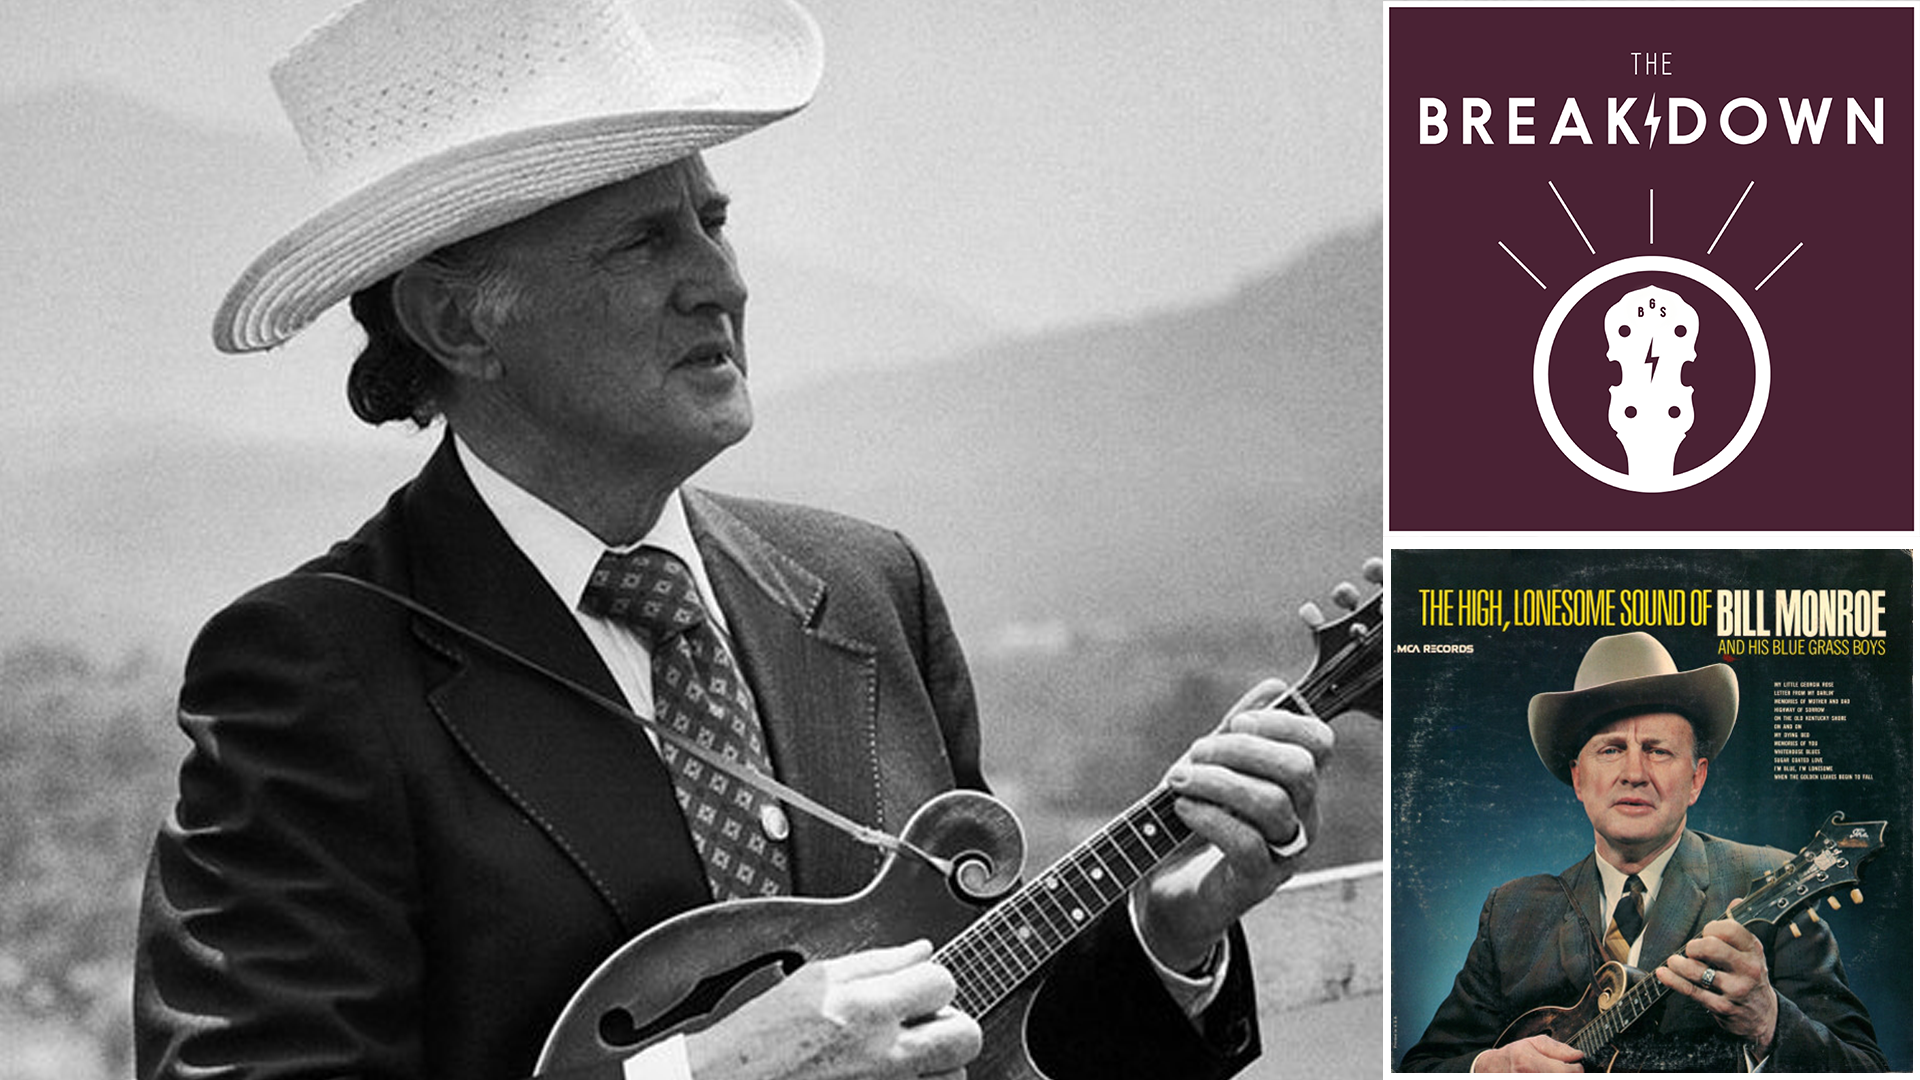 The Breakdown – 'The High, Lonesome Sound of Bill Monroe'